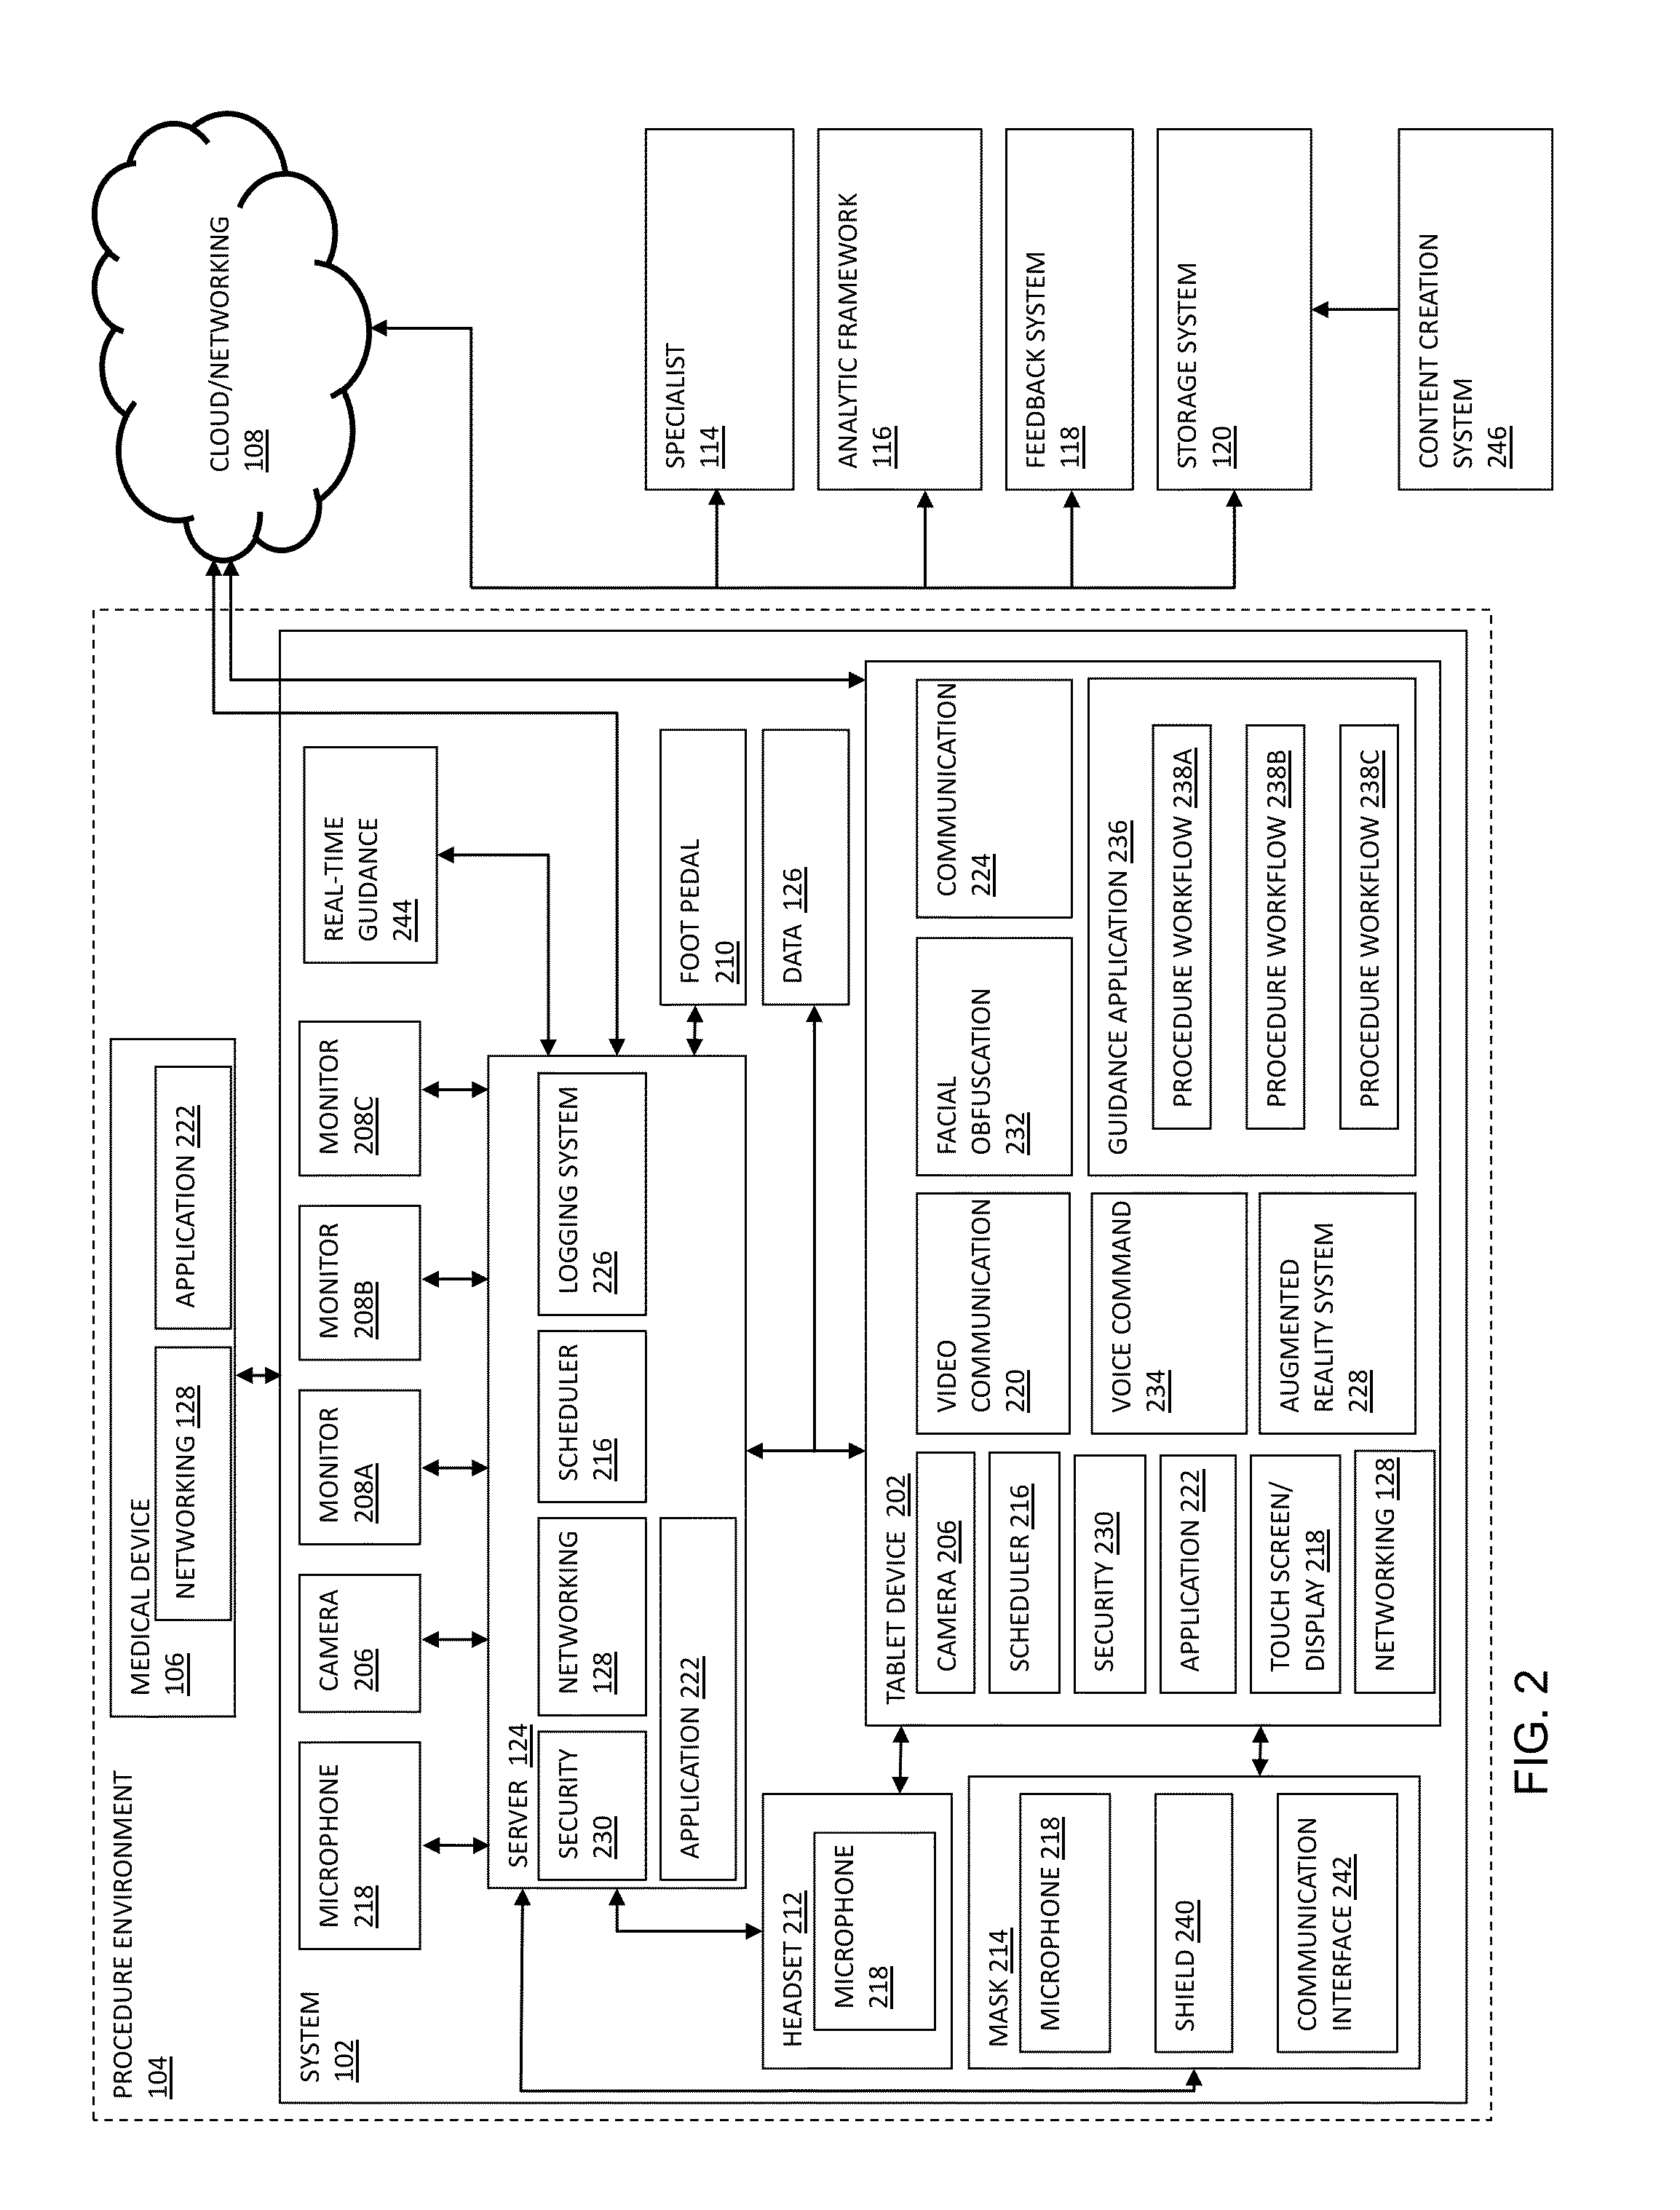 Systems and methods for providing guidance for a procedure with a device